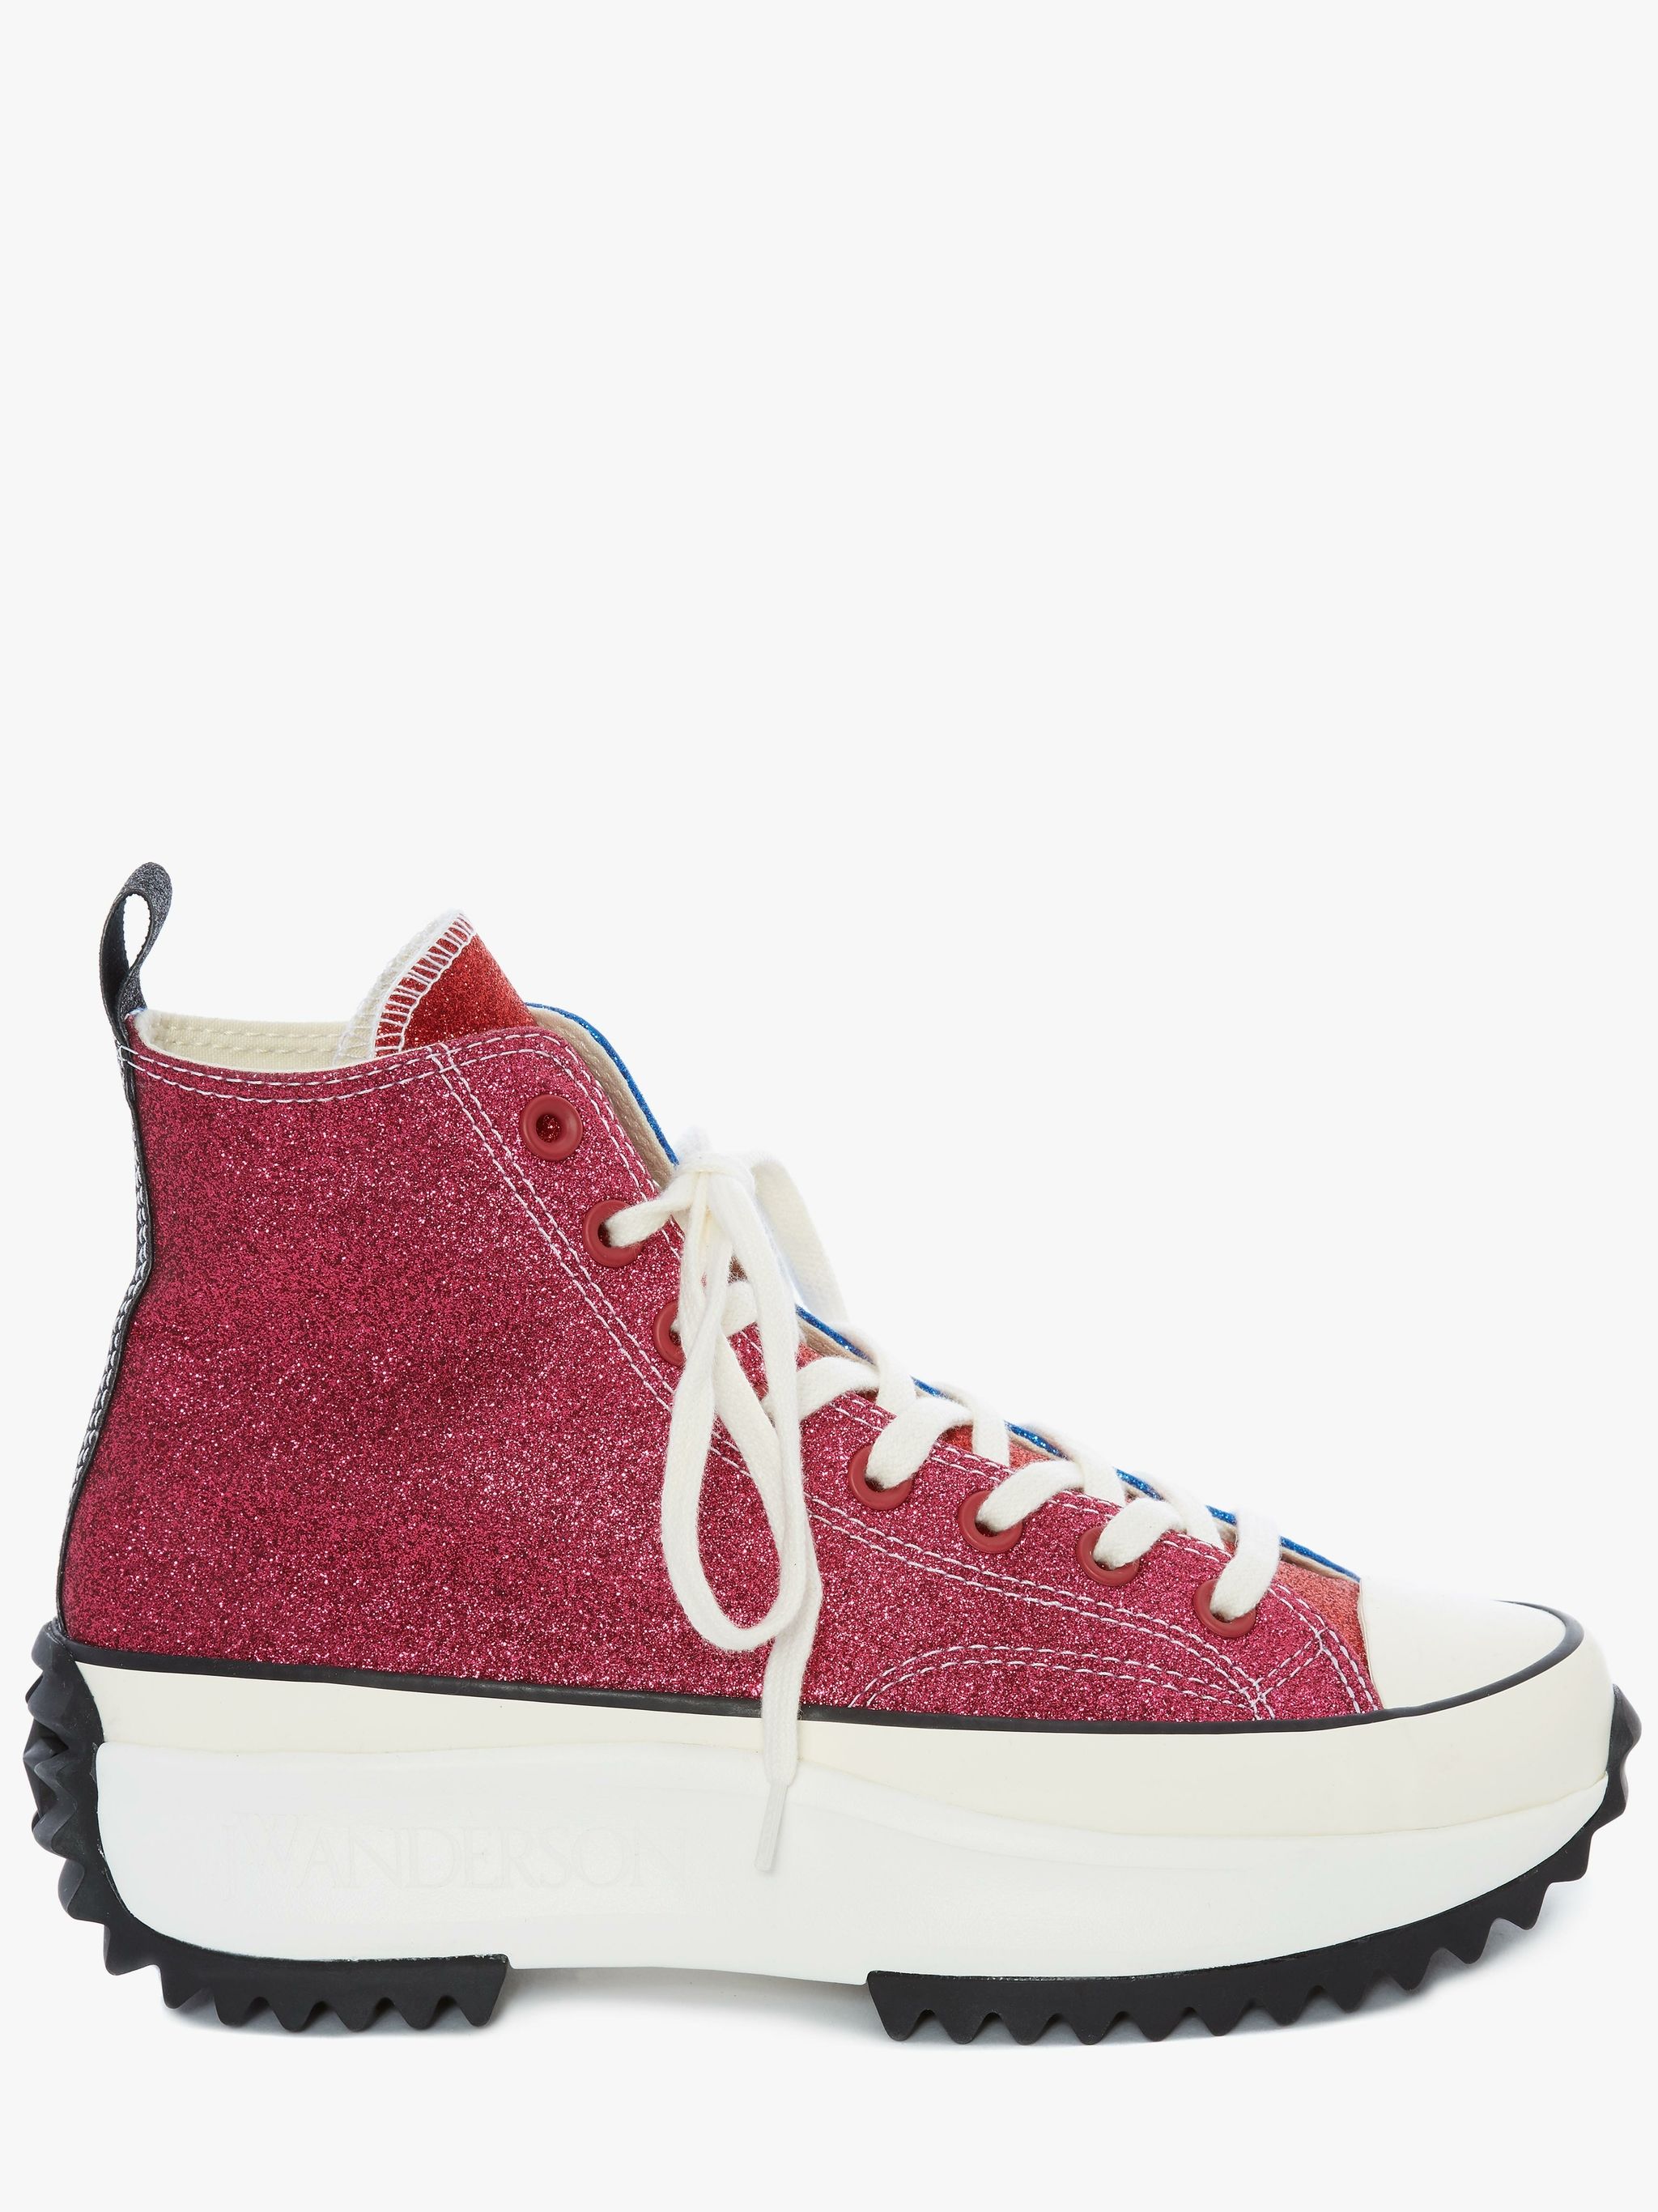 x Converse Glitter Run Star Hike high-top sneakers in pink | JW Anderson